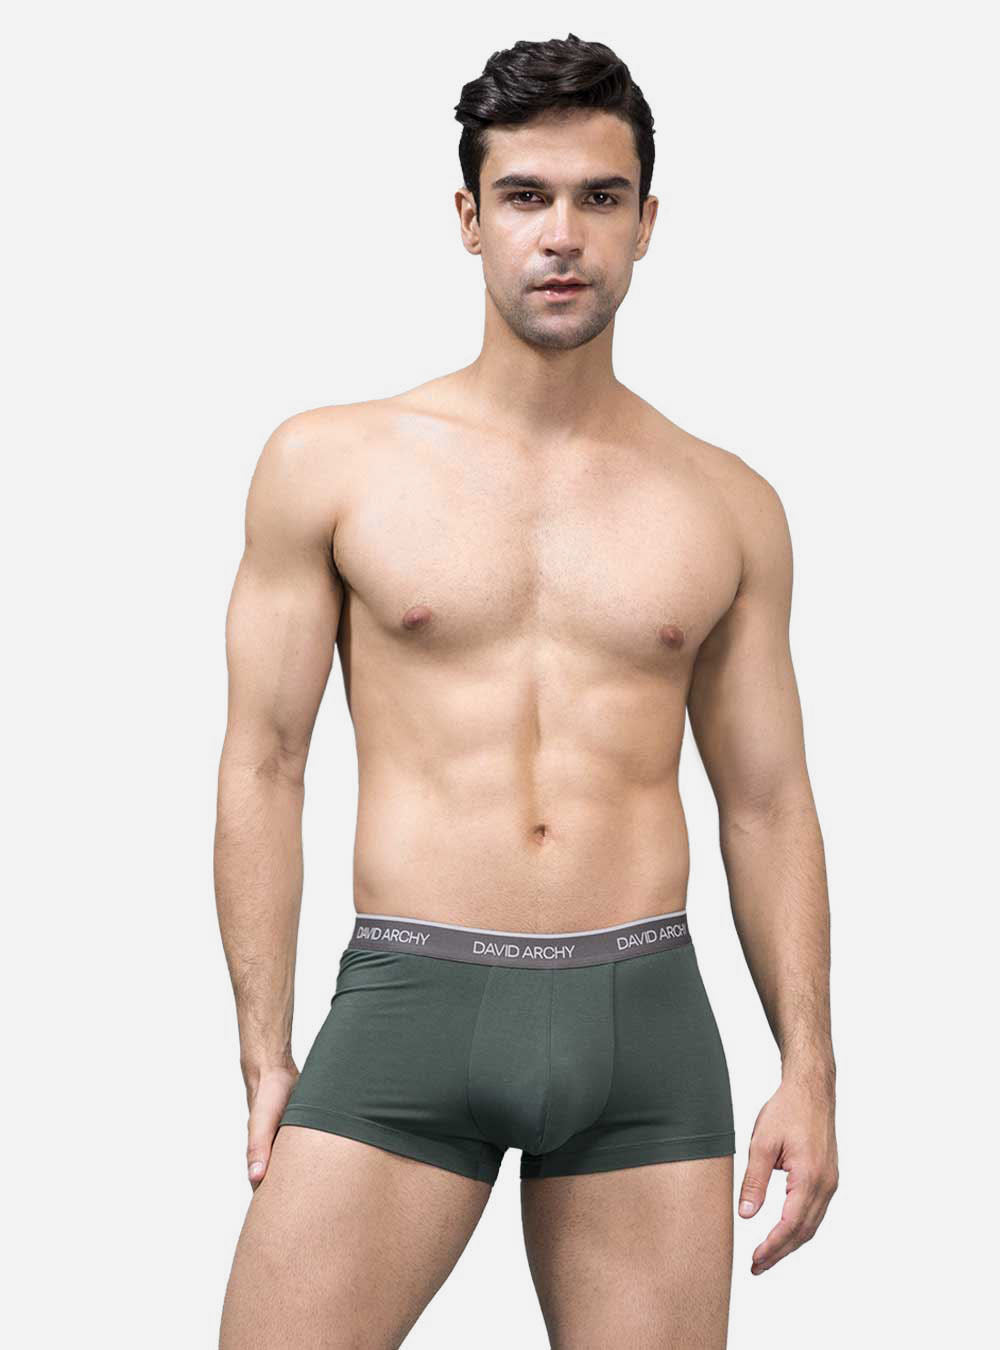 Mens Soft Bamboo Rayon Dual Pouch Mens Brief Underwear 3 Pack, Comfortable  & Breathable, USA Sizes S XL 231027 From Youngstore03, $31.53